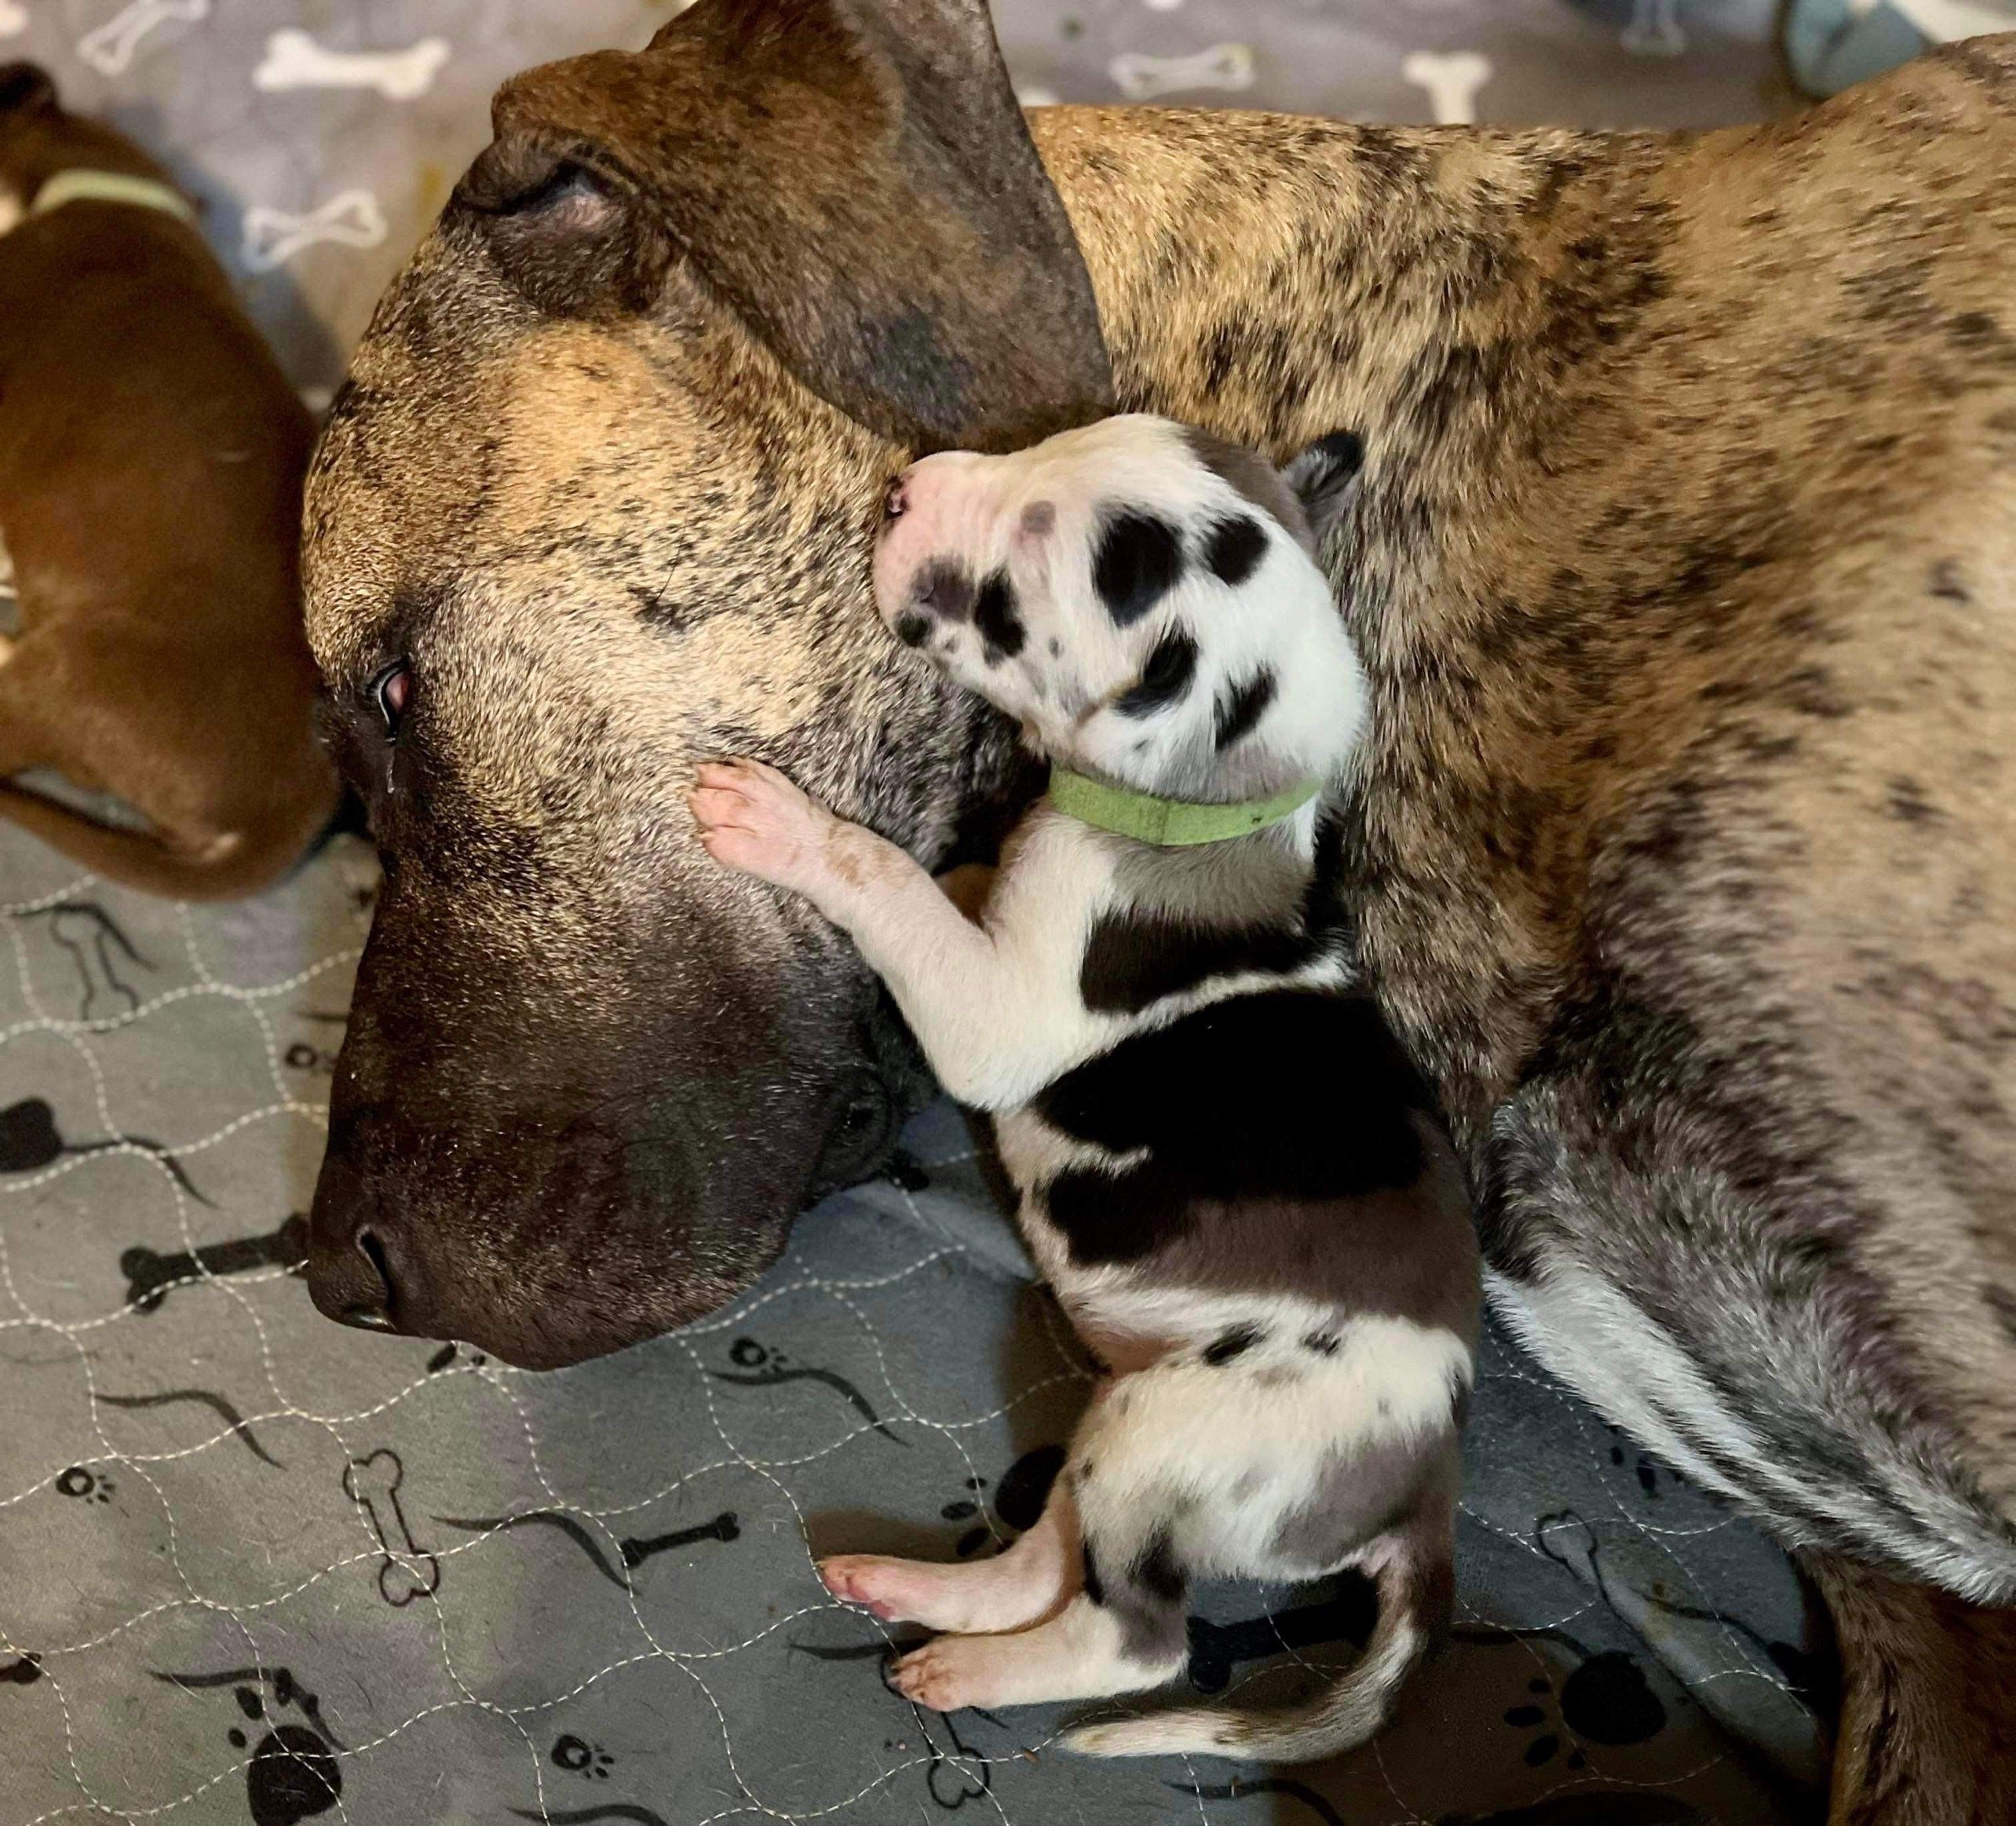 Super mom: Great Dane from Virginia gives birth to 21 puppies in 27 hours